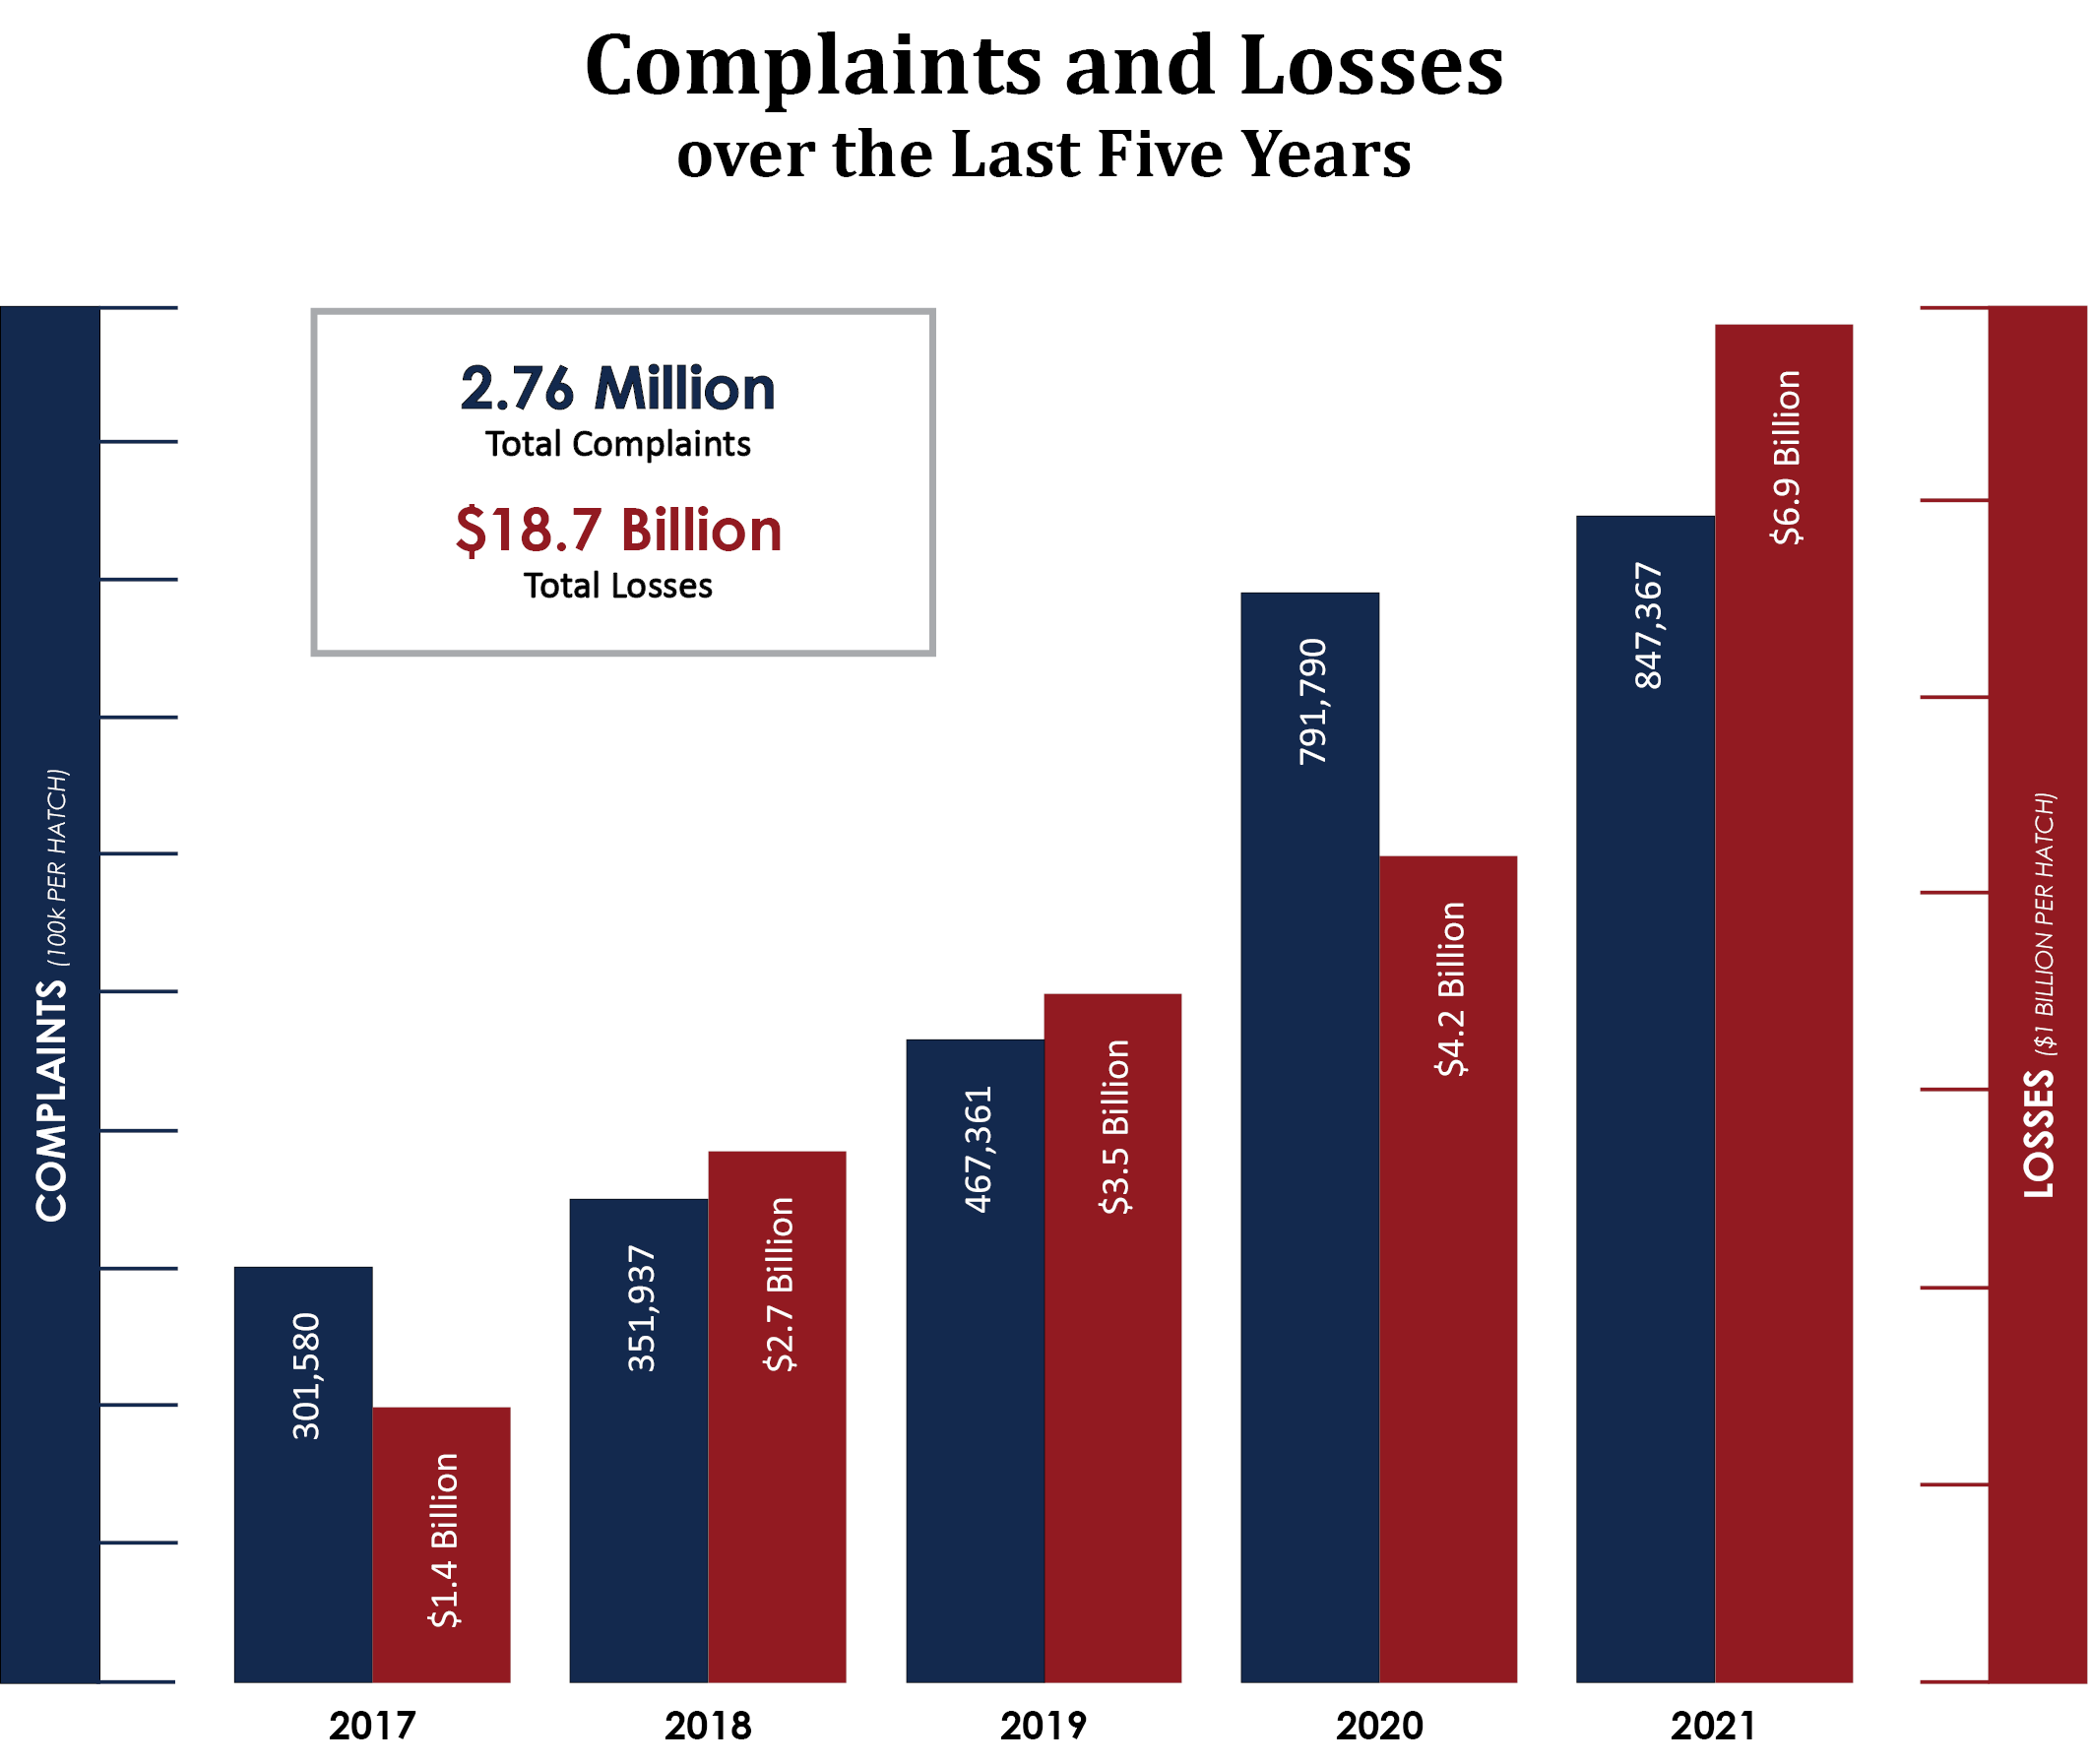 This chart displays total complaints and loses over the last five years. In 2017 there were 301,580 complaints and $1.4 billion in loses. In 2018 there were 351,937 complaints and $2.7 billion in loses. In 2019 there were 467,361 complaints and $3.5 billion in loses. In 2020 there were 791,790 complaints and $4.2 billion in loses. In 2021 there were 847,367 complaints and $6.9 billion in loses. In the total five-year period from 2017 to 2021 IC3 received a total of 2,760,044 complaints, reporting a loss of $18.7 billion.